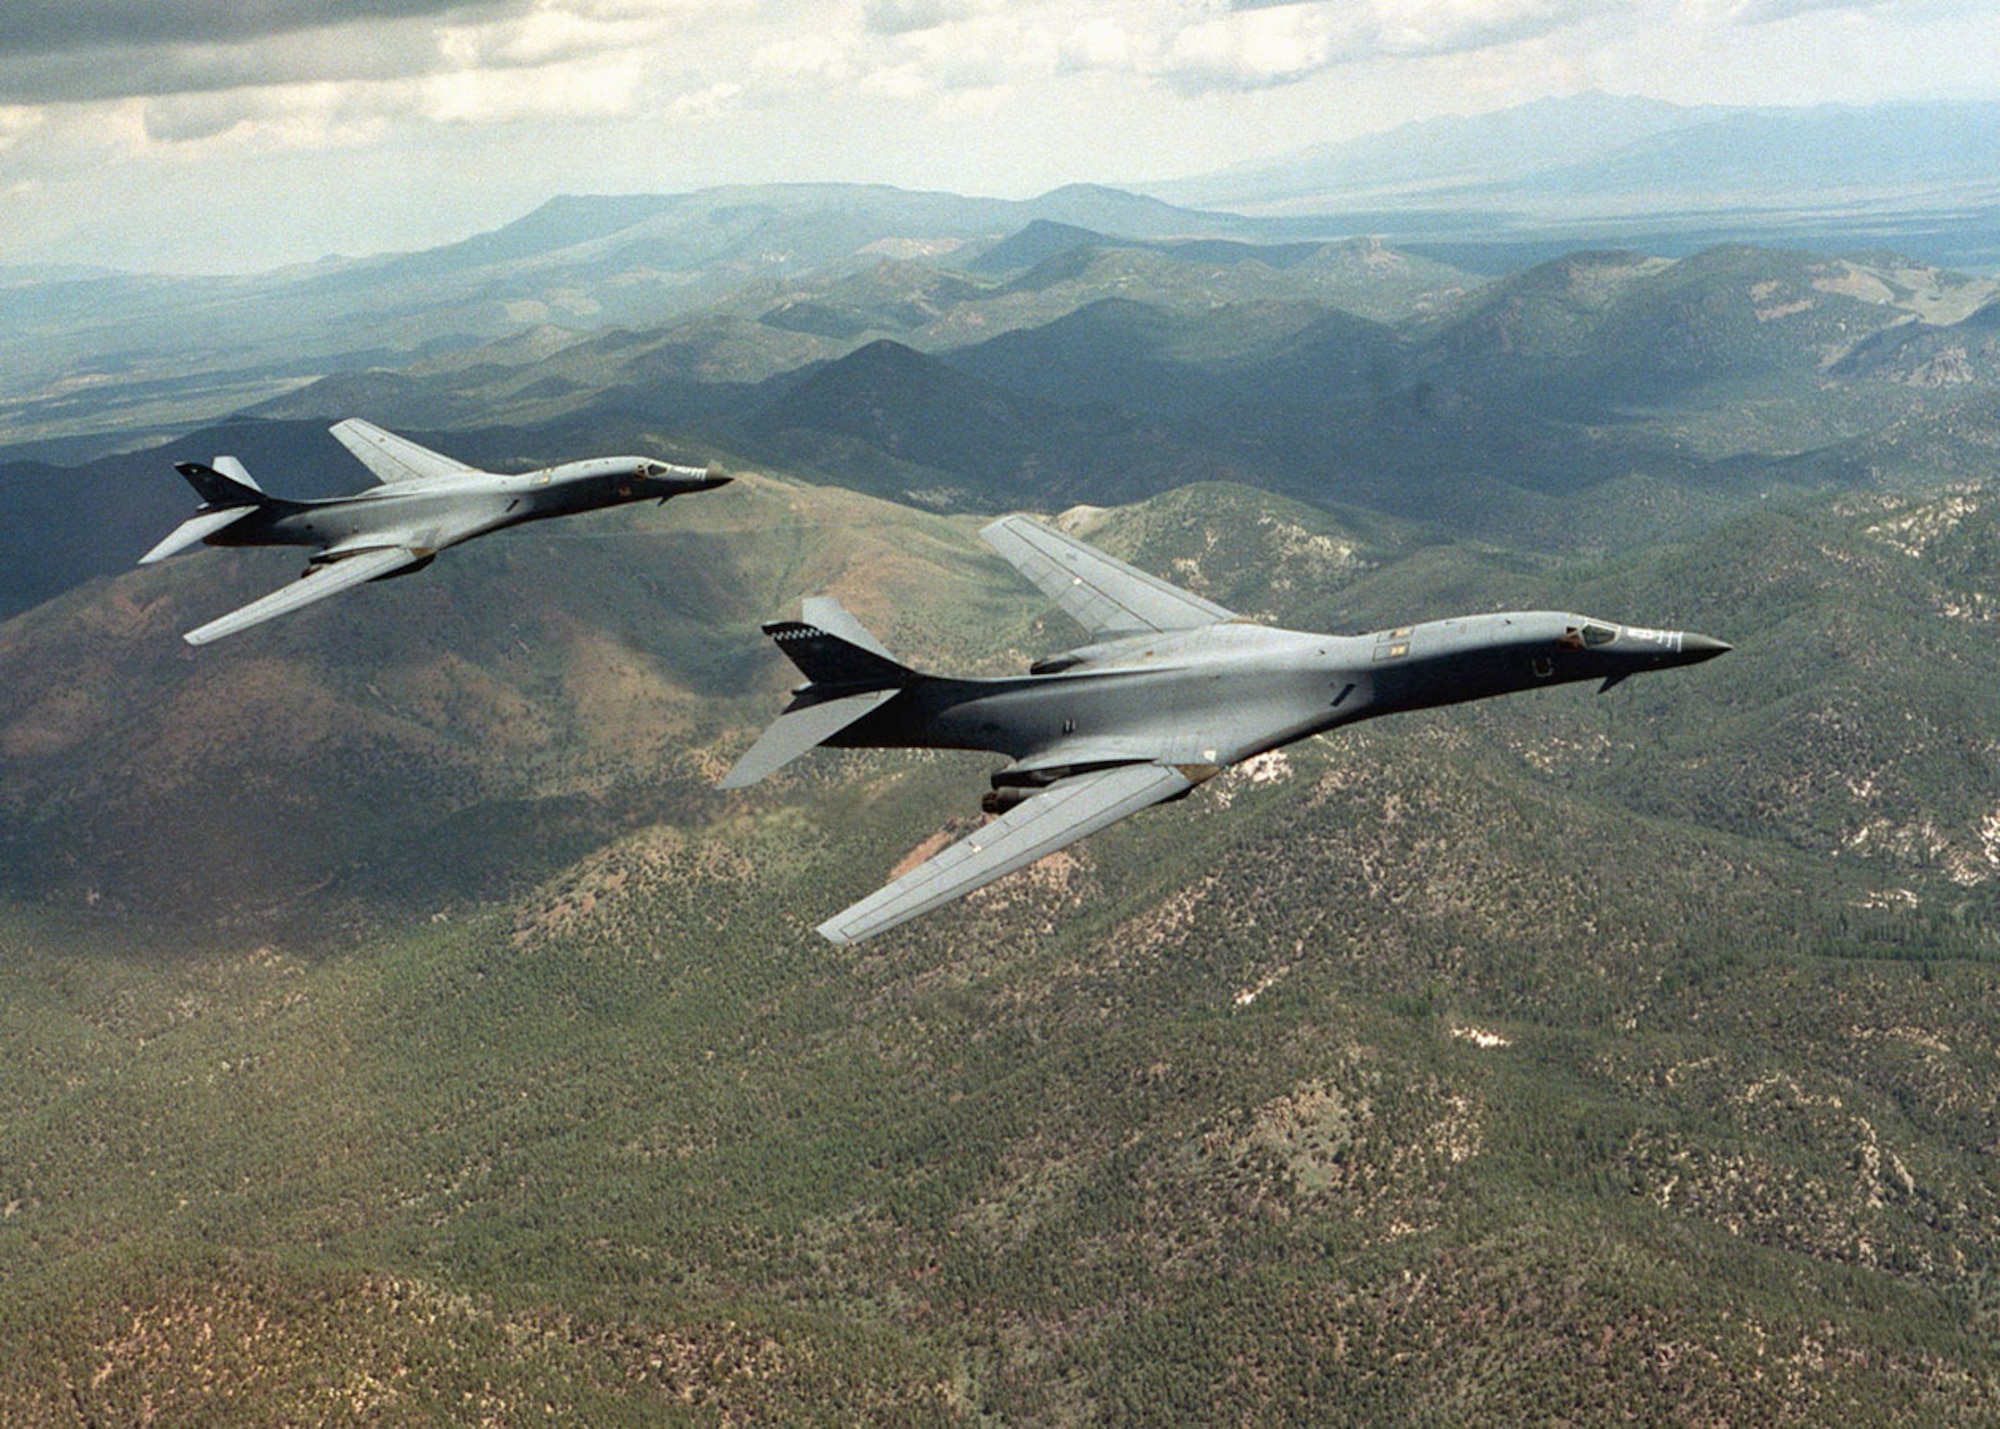 The B-1B is a long-range strategic bomber, capable of flying intercontinental missions without refueling, then penetrating present and future sophisticated enemy defenses. It can perform a variety of missions, including that of a conventional weapons carrier for theater operations. The B-1B's electronic jamming equipment, infrared countermeasures, radar location and warning systems complement its low-radar cross-section and form an integrated defense system for the aircraft. The swing-wing design and turbofan engines not only provide greater range and high speed at low levels but they also enhance the bomber's survivability. Wing sweep at the full-forward position allows a short takeoff roll and a fast base-escape profile for airfields under attack. Once airborne, the wings are positioned for maximum cruise distance or high-speed penetration. (U.S. Air Force photo by Staff Sgt. Steve Thurow)